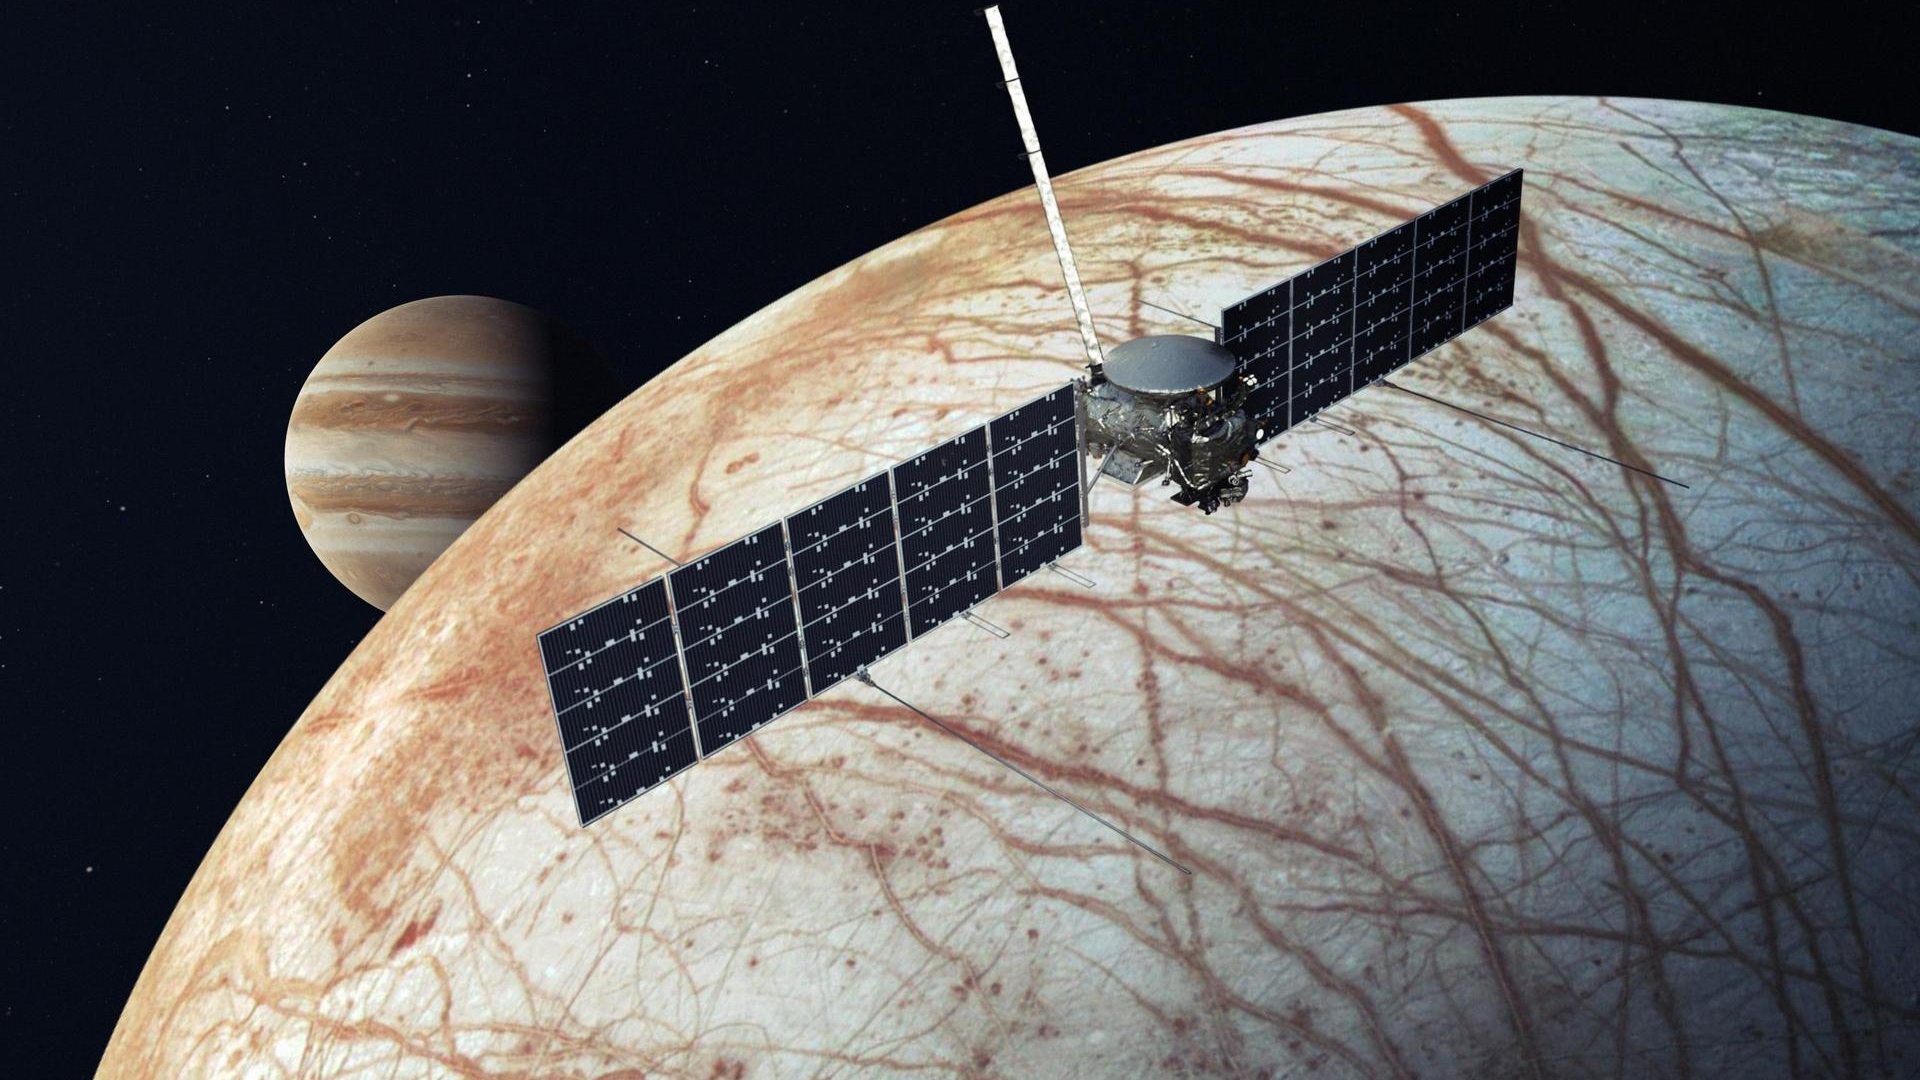 NASA selects SpaceX for mission to Jupiter moon Europa